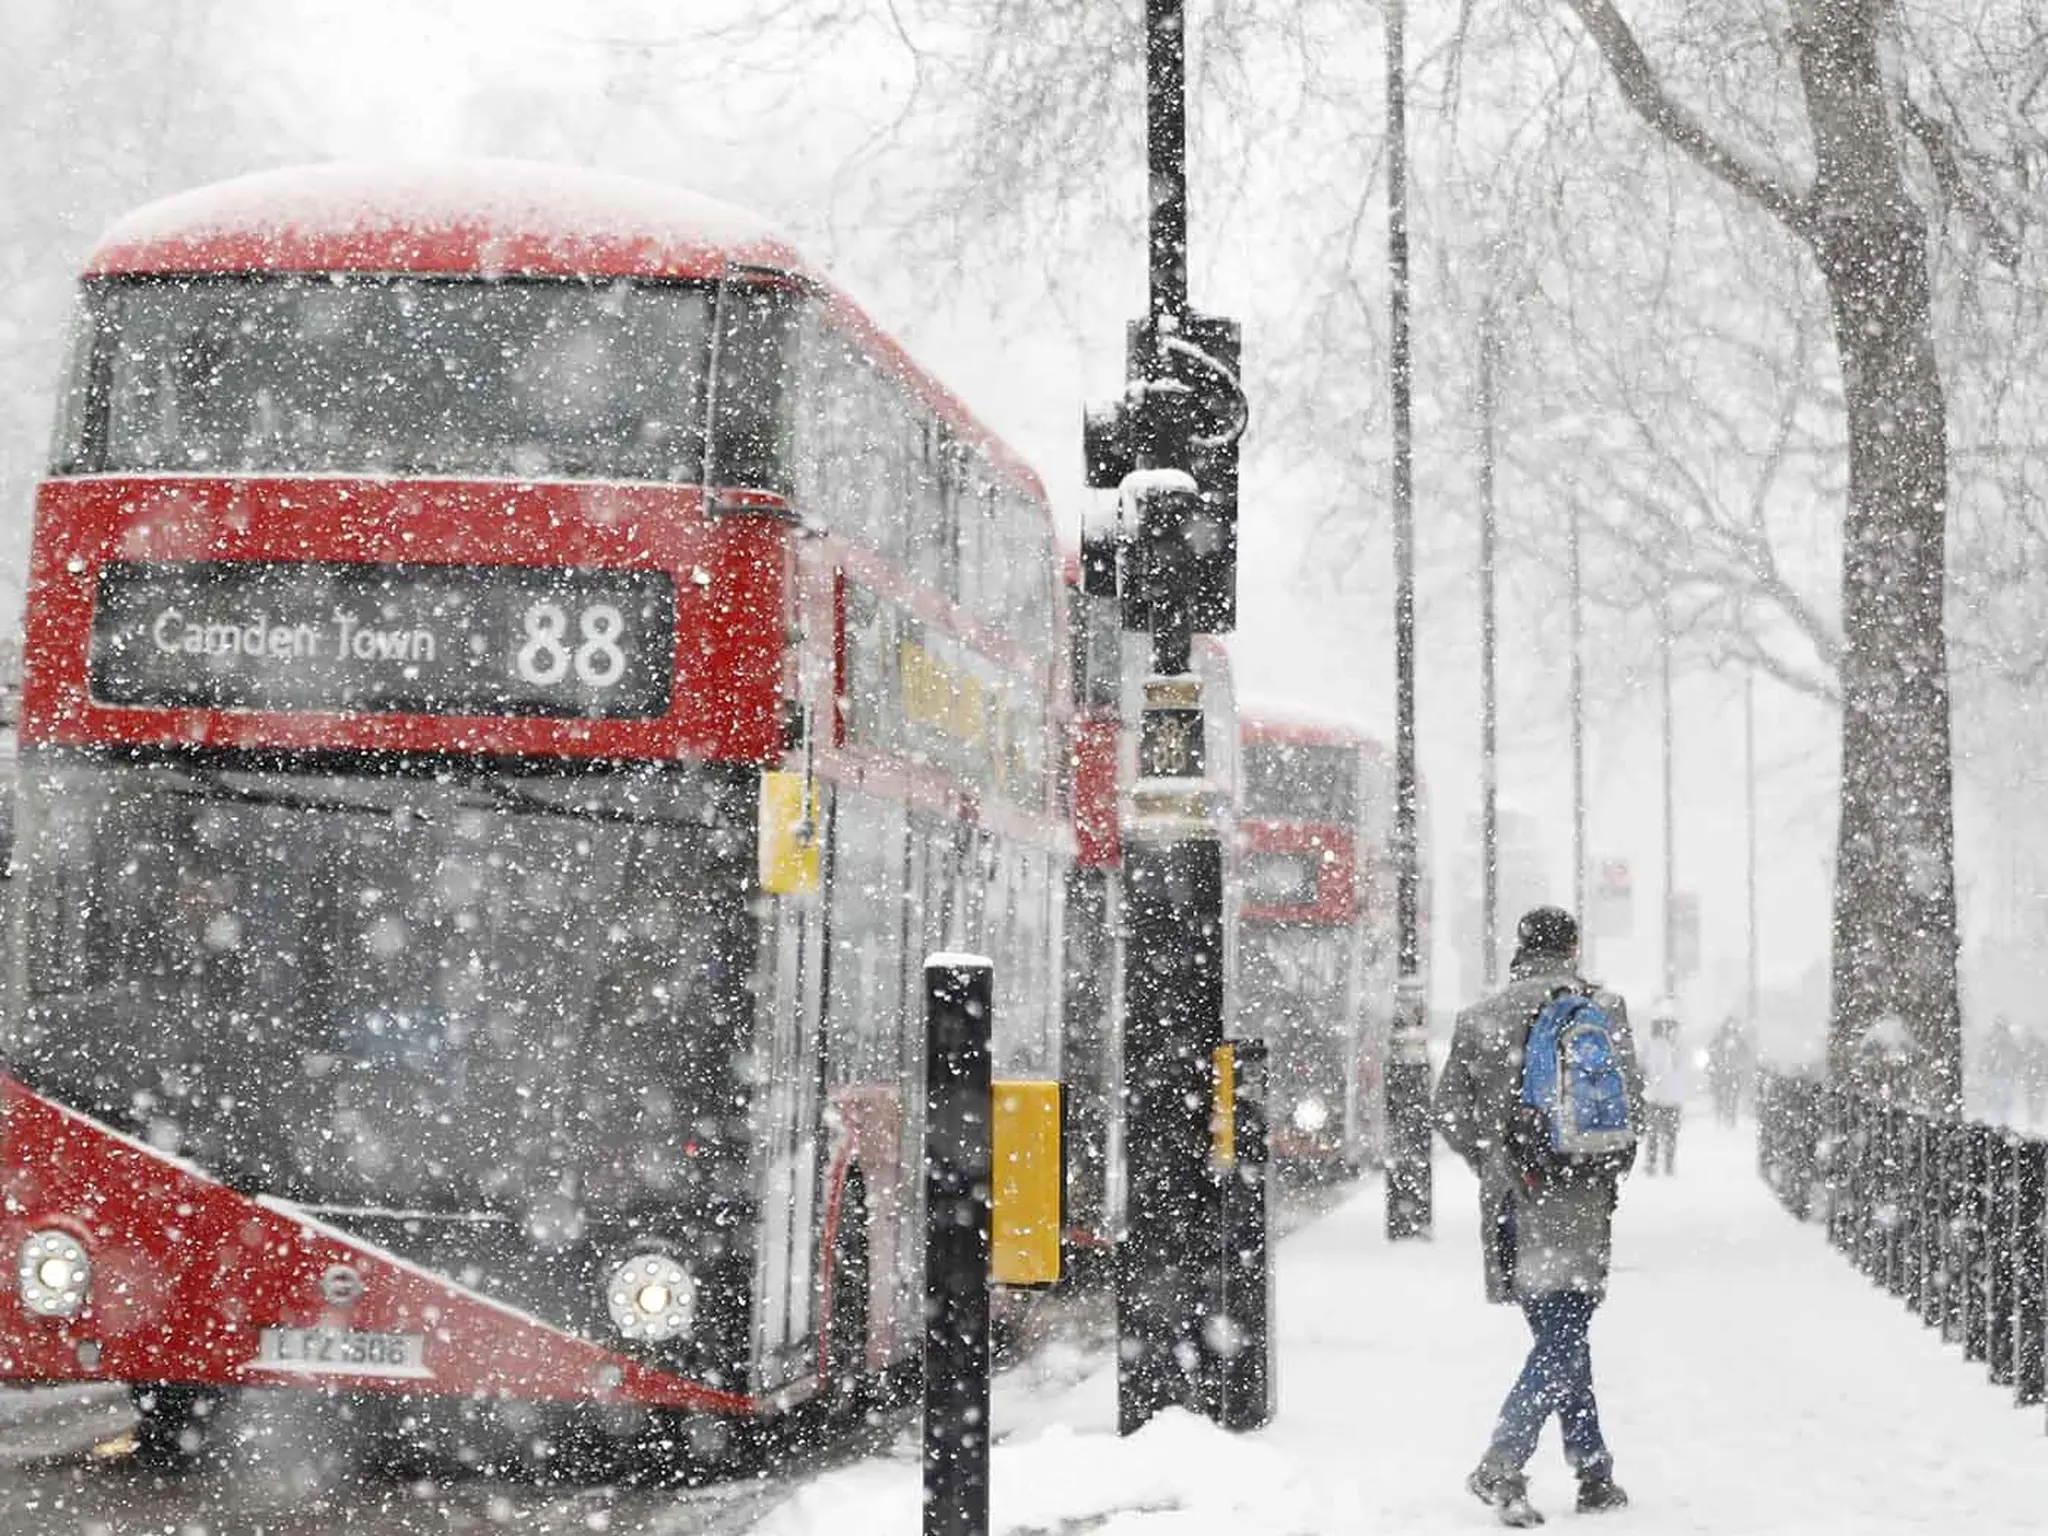 Britain announces the disruption of railways due to freezing temperatures and snow